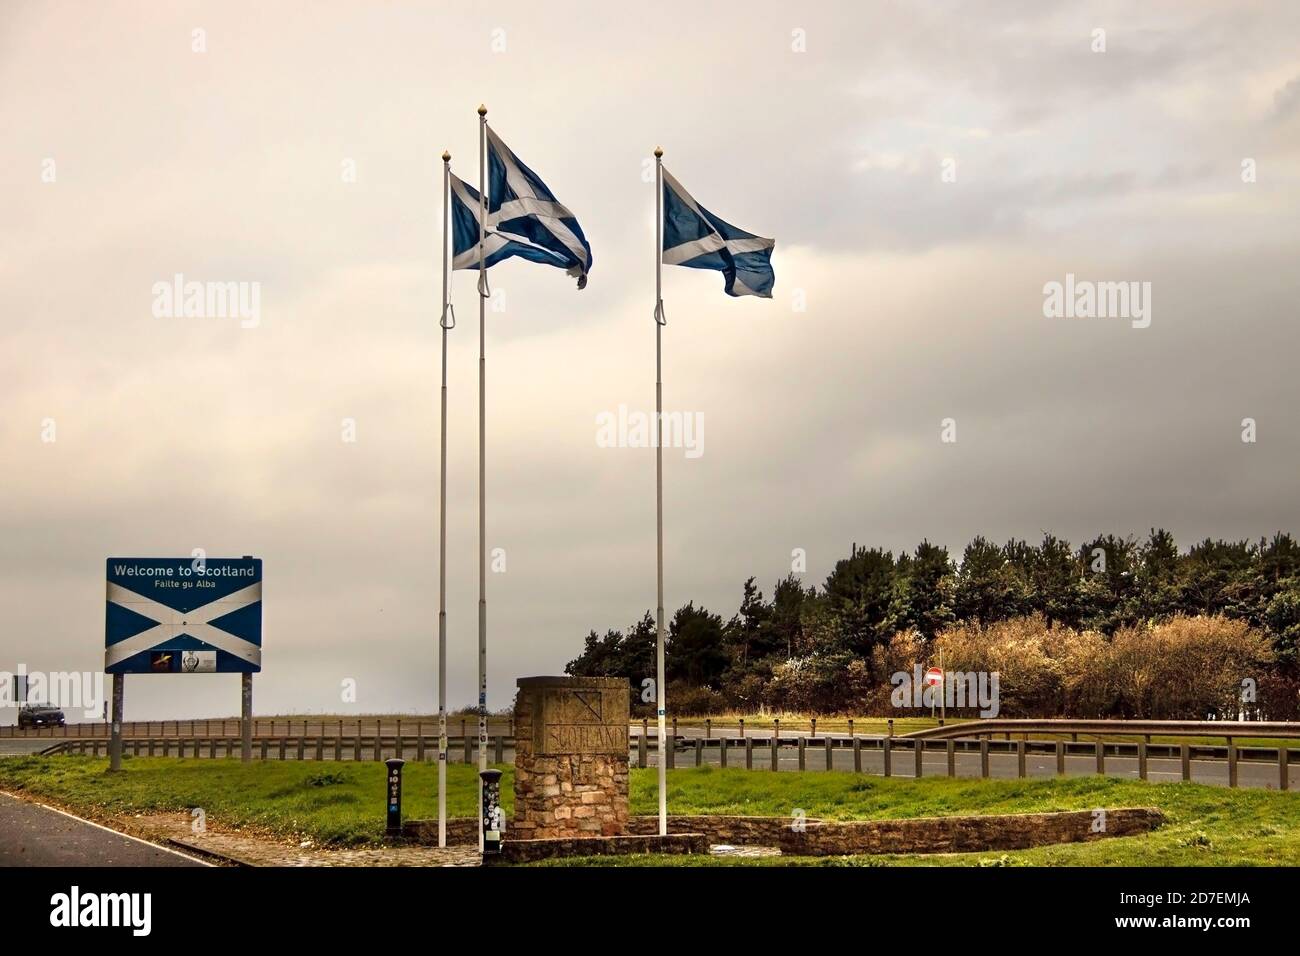 Scotland and England border with Scottish flags and welcome to Scotland sign. Stock Photo